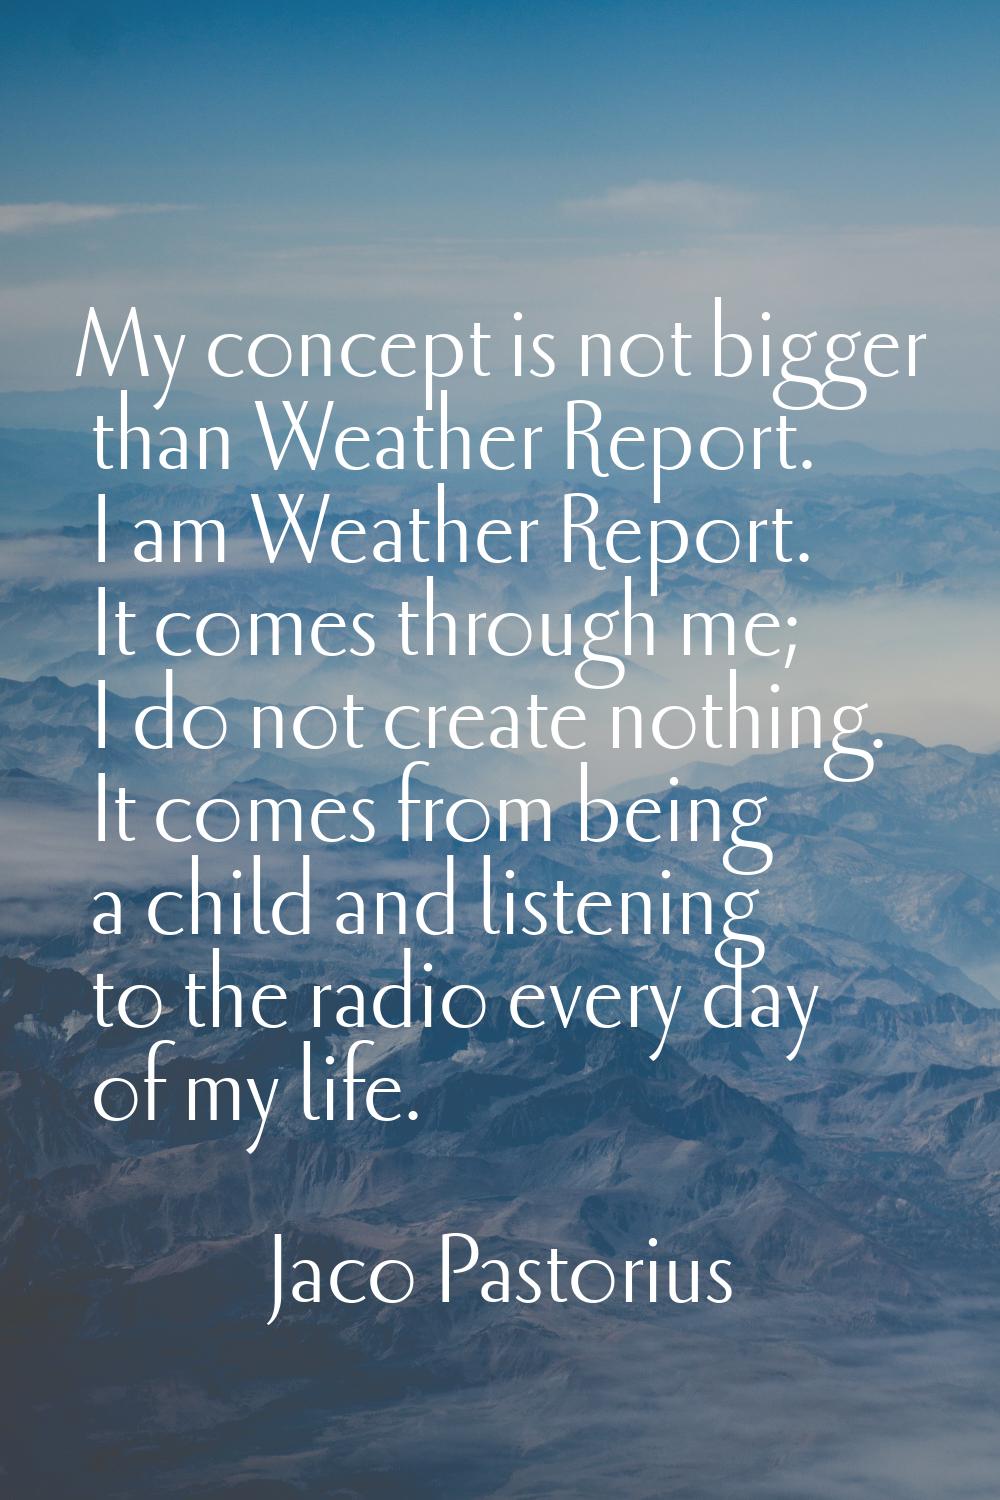 My concept is not bigger than Weather Report. I am Weather Report. It comes through me; I do not cr